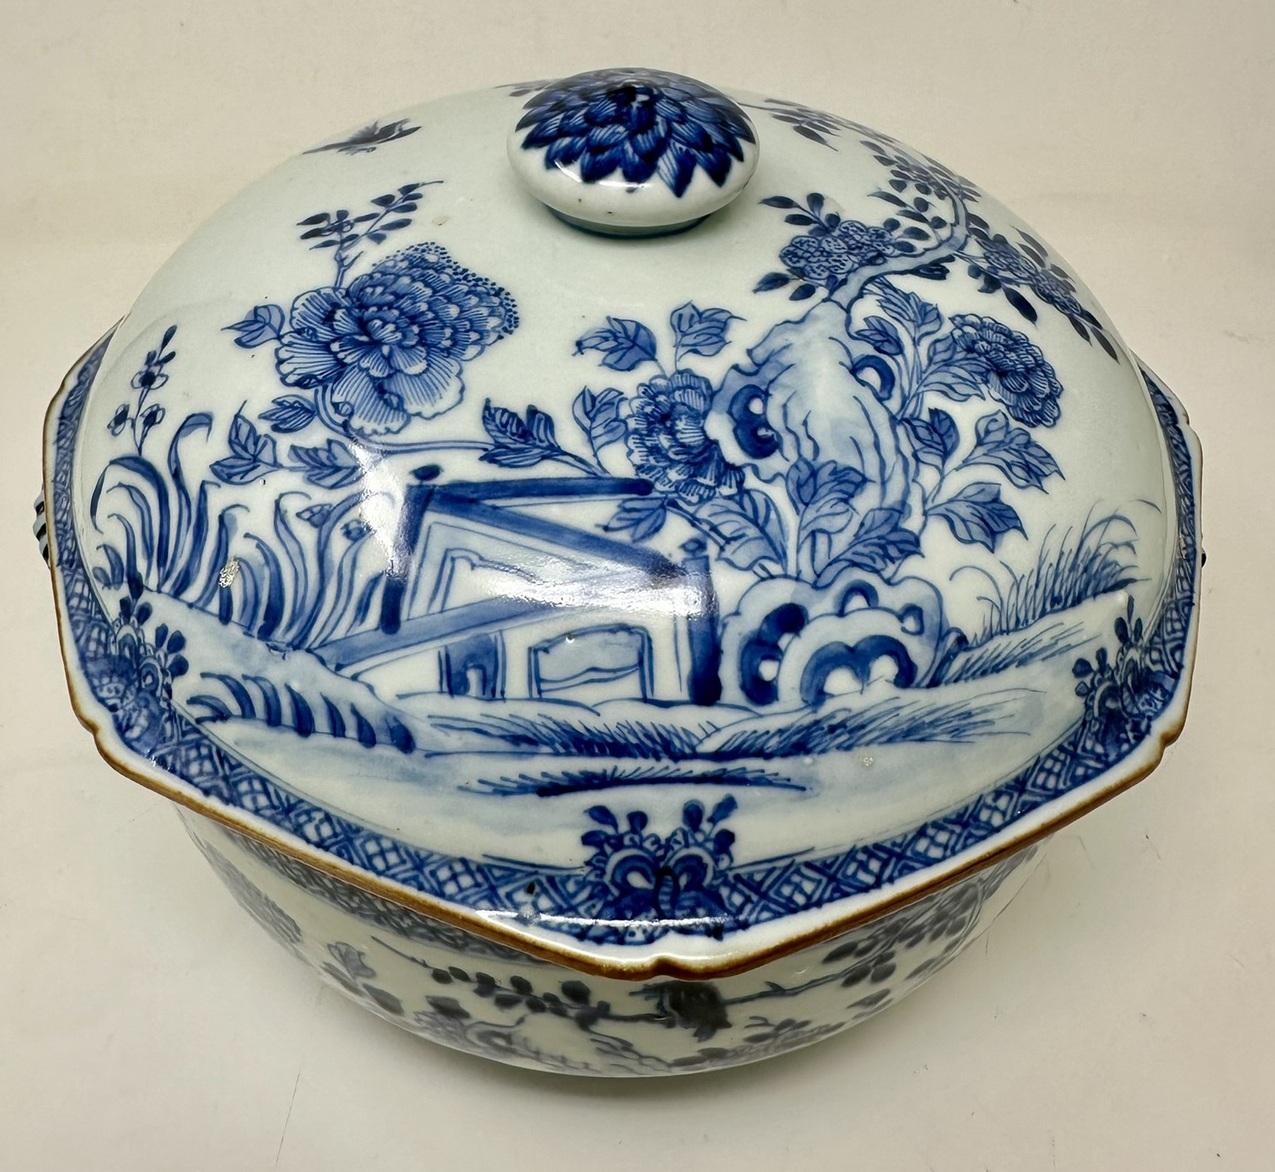 Antique Chinese Export Porcelain Blue White Chien Lung Soup Tureen Centerpiece In Good Condition For Sale In Dublin, Ireland